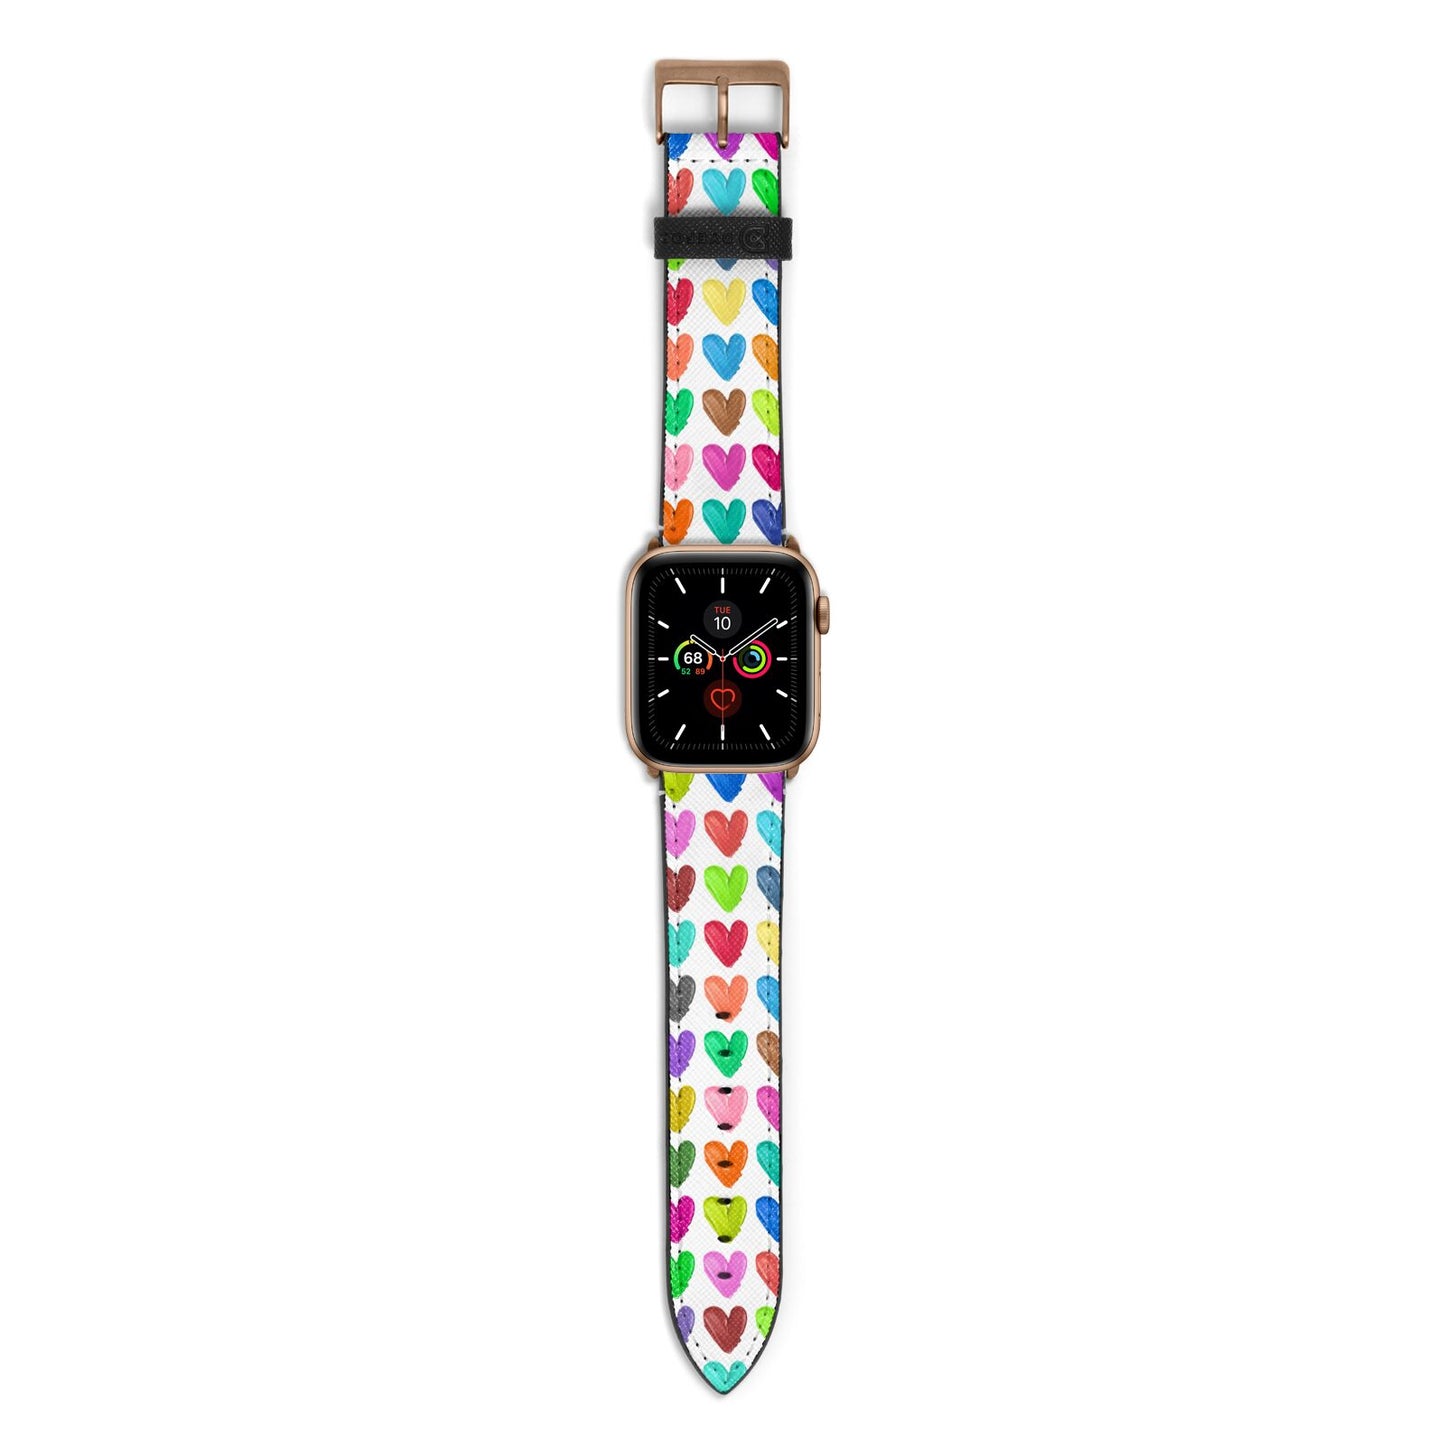 Polka Heart Apple Watch Strap with Gold Hardware